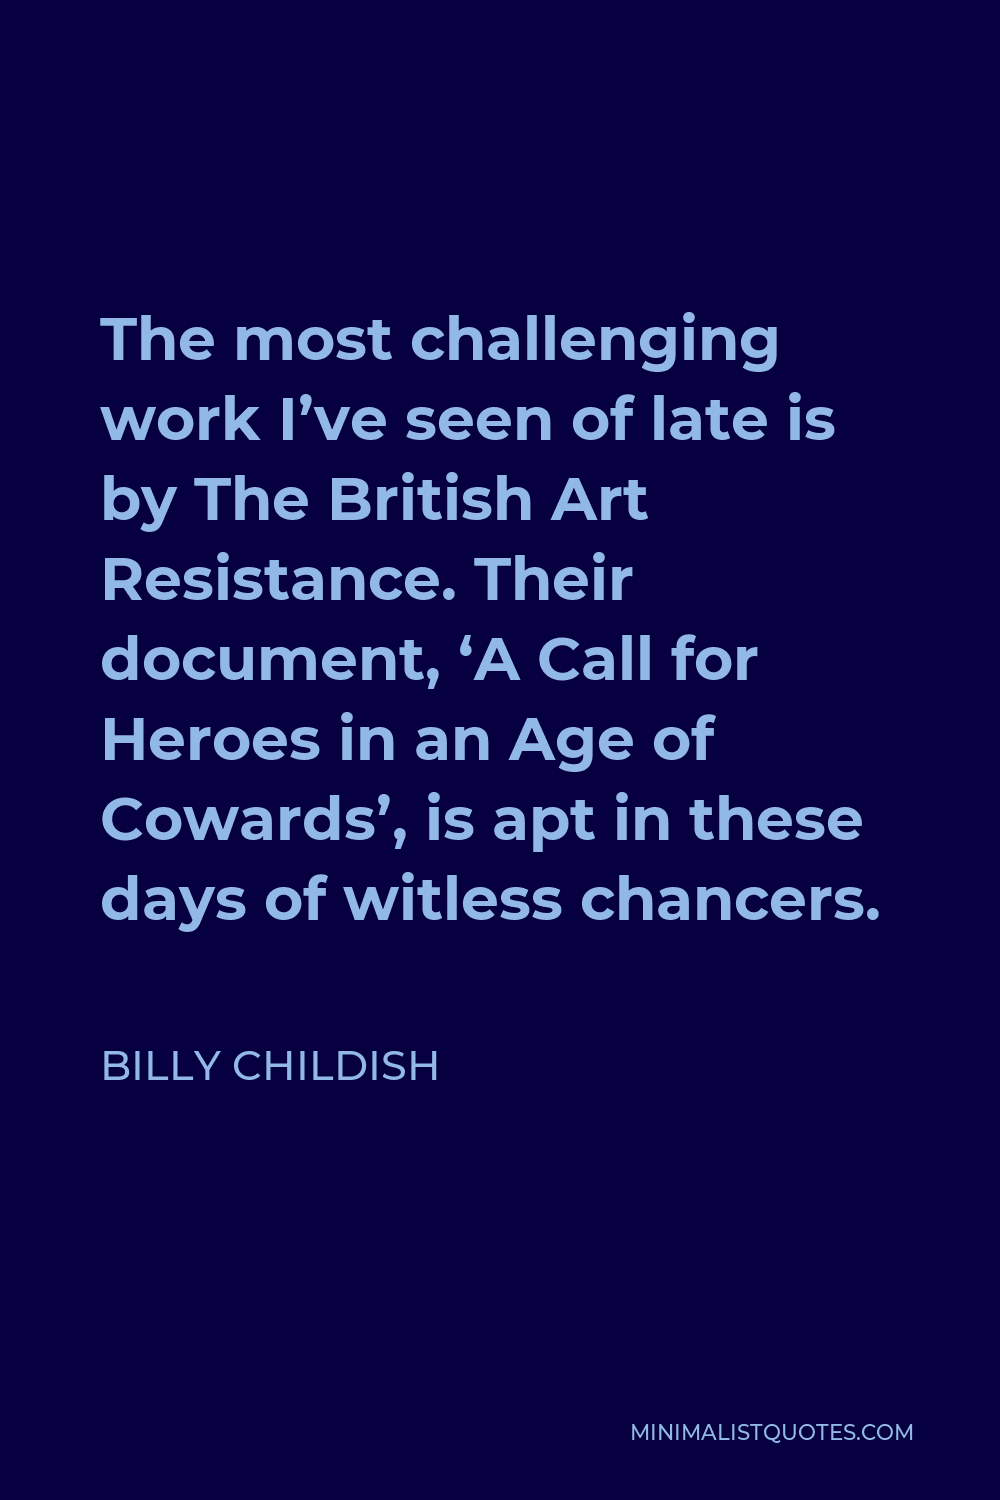 Billy Childish Quote - The most challenging work I’ve seen of late is by The British Art Resistance. Their document, ‘A Call for Heroes in an Age of Cowards’, is apt in these days of witless chancers.